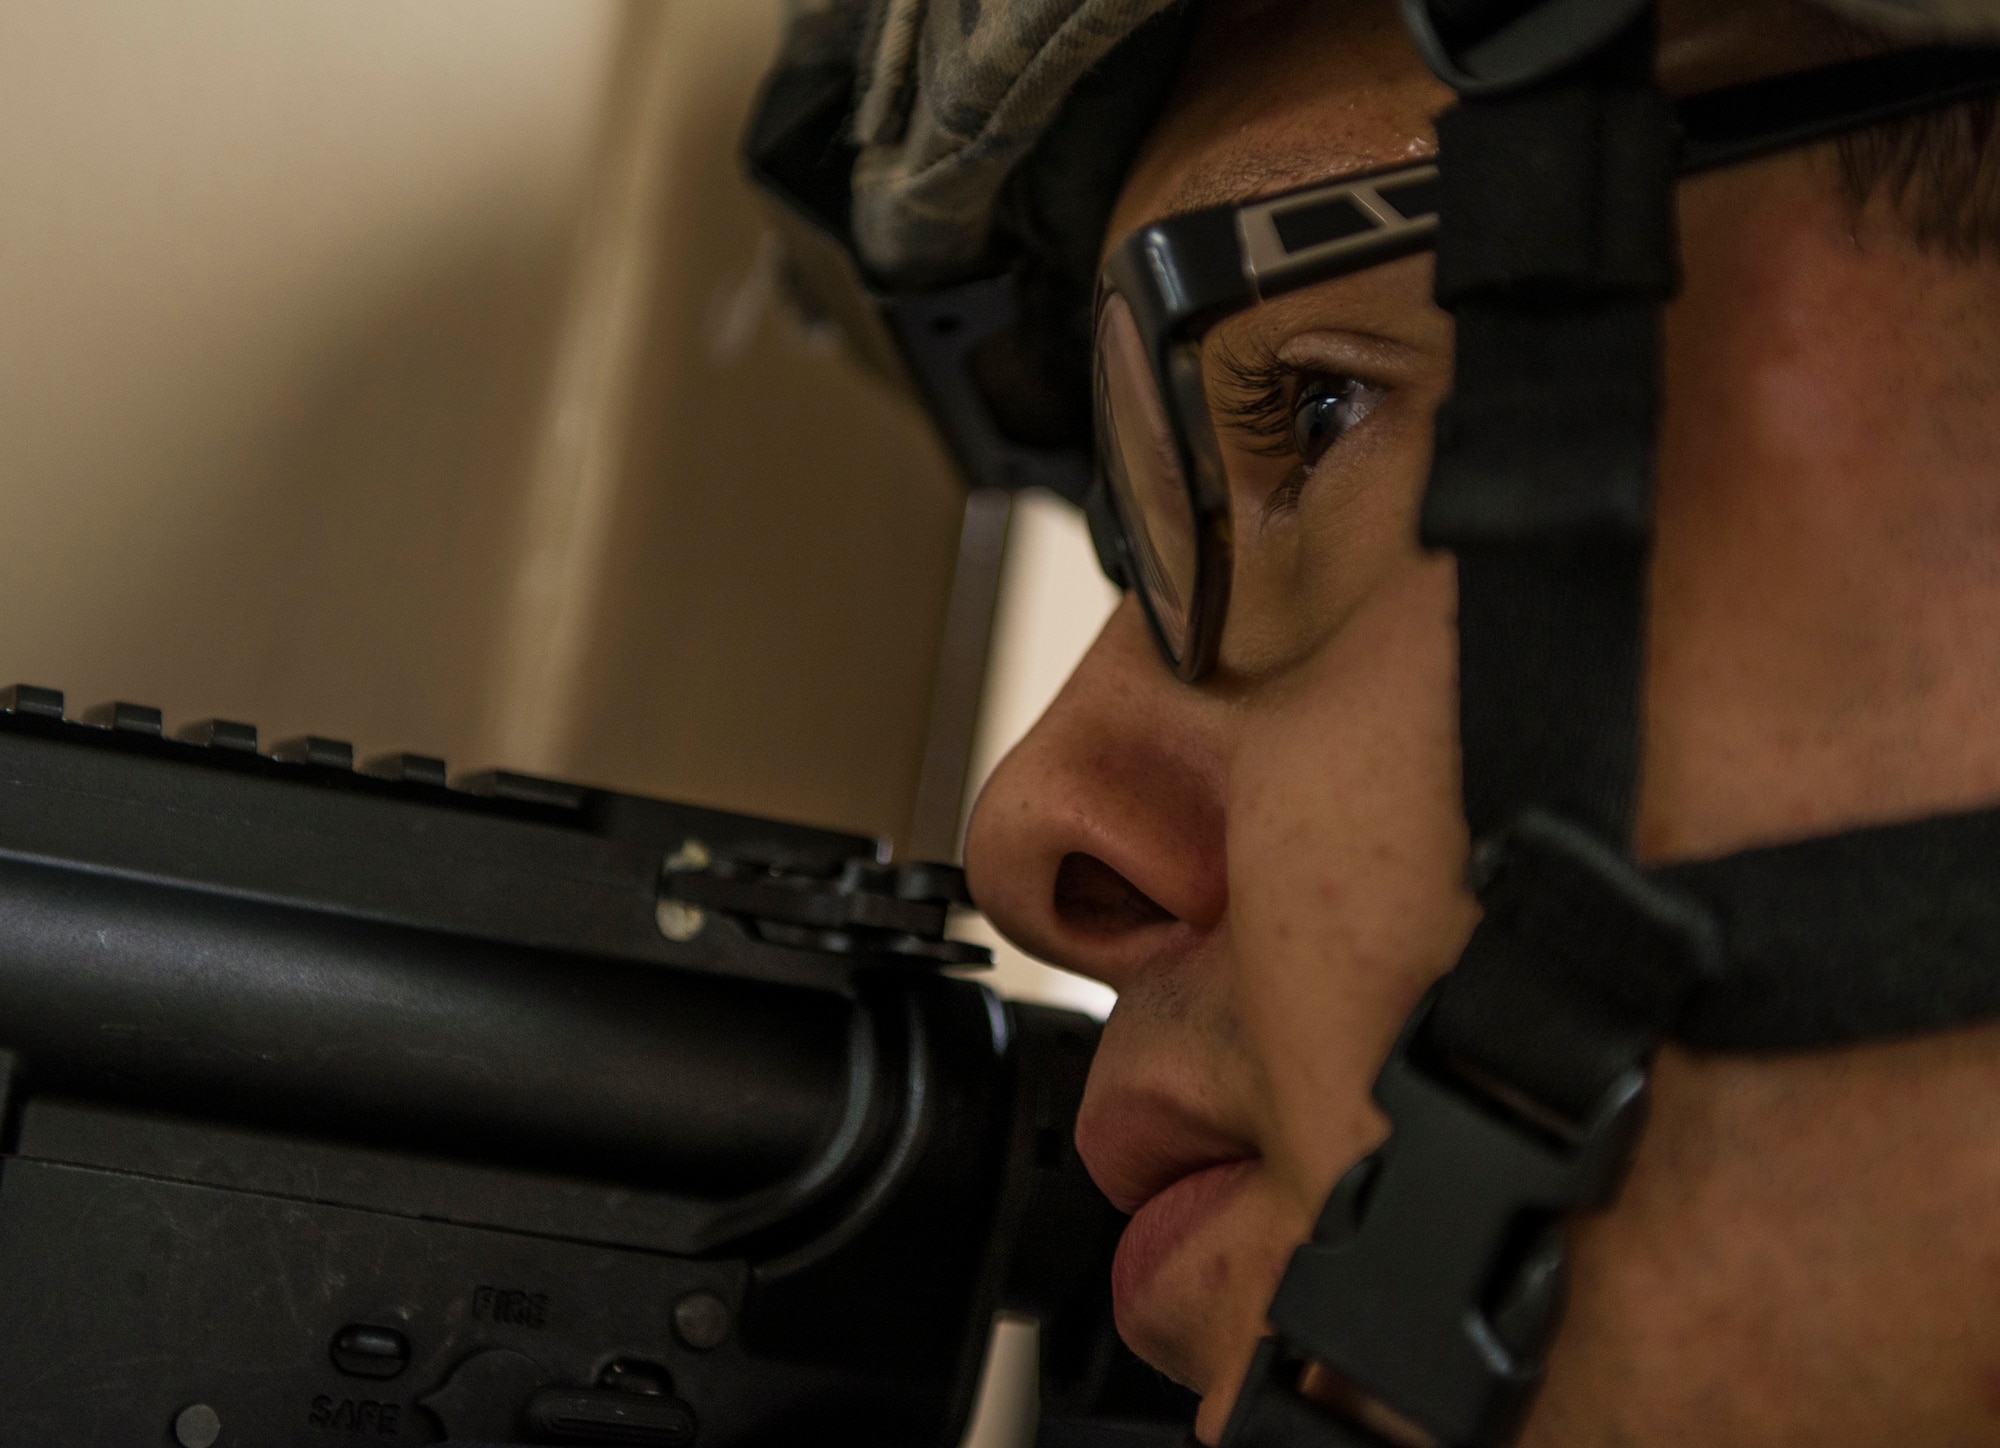 Staff Sgt. David Haywood, 375th Security Forces Squadron, looks ahead as he keeps guard during an active shooter exercise, Scott Air Force Base, Ill., Sept. 9, 2016.  With an increase of mass shootings, the Department of Defense has trained personnel and first responders on how to respond in an active shooter situation.